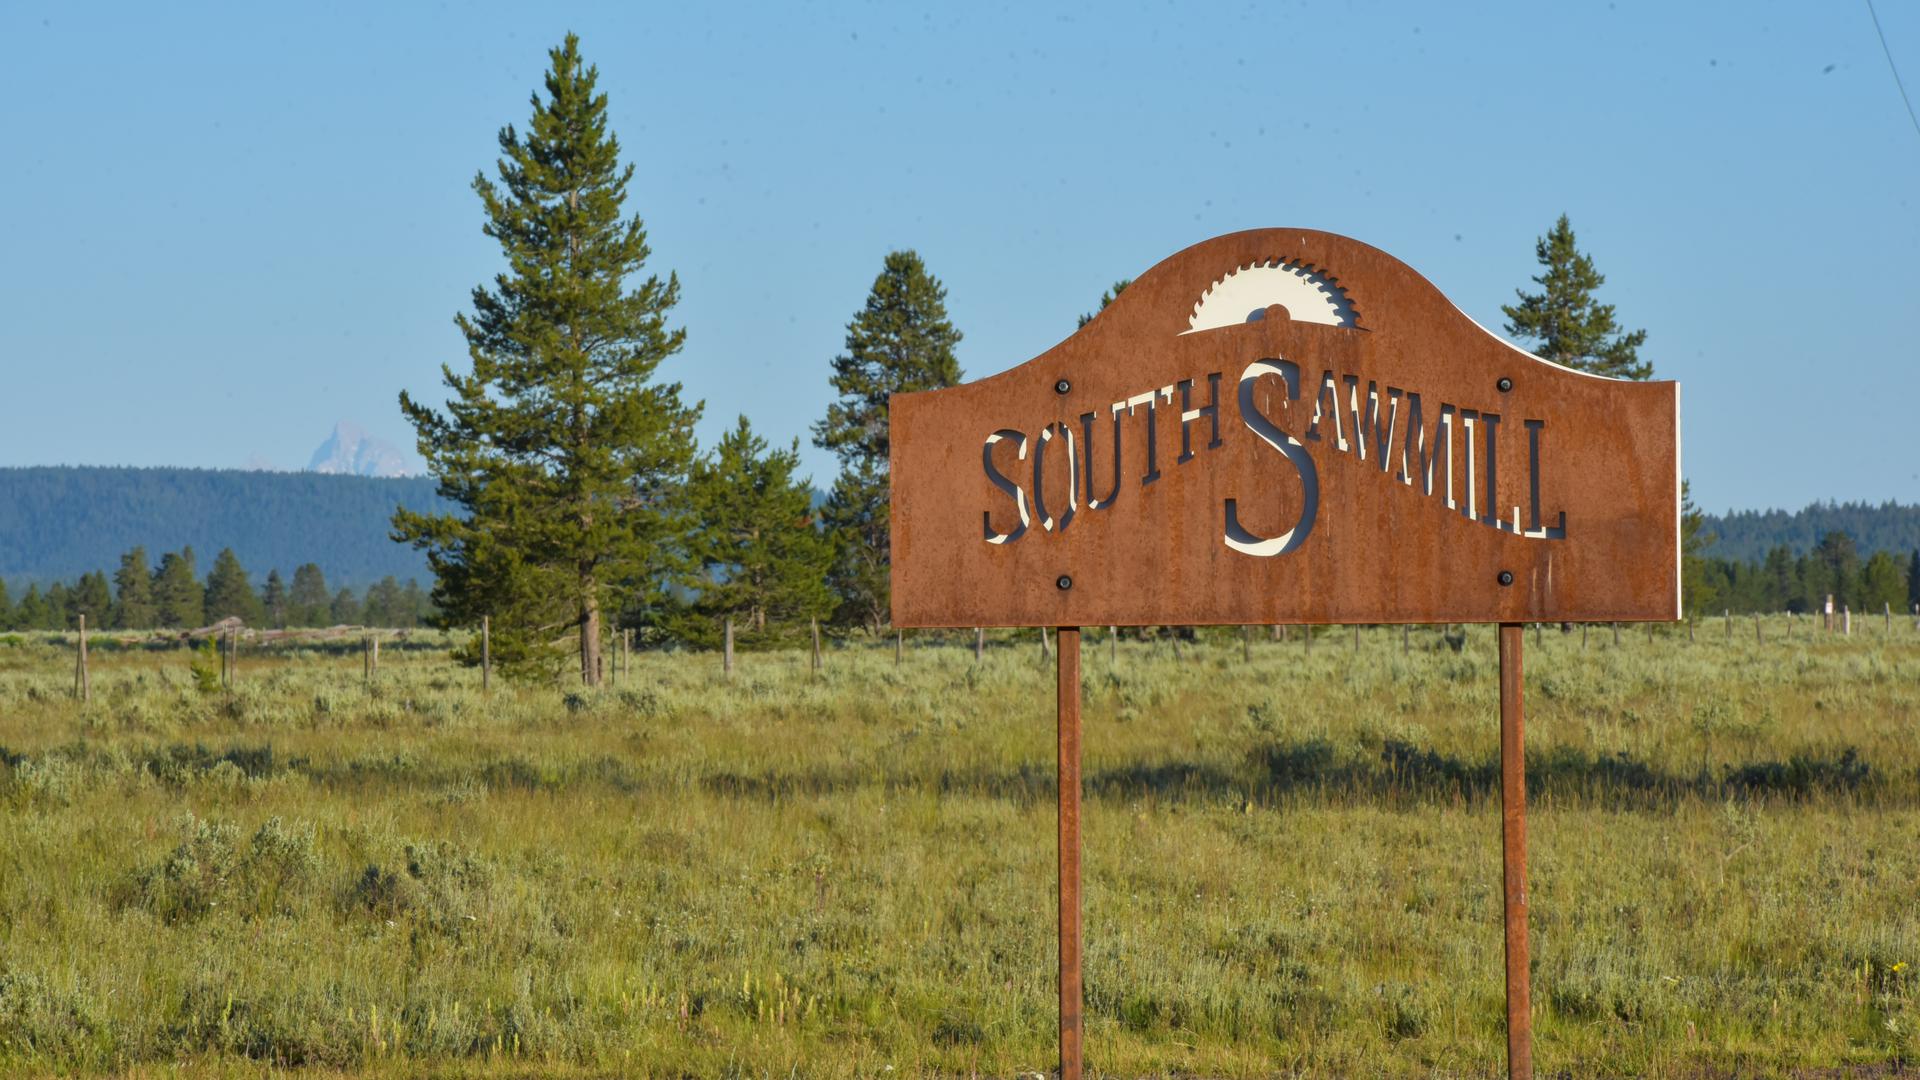 The South Sawmill lodge sign.